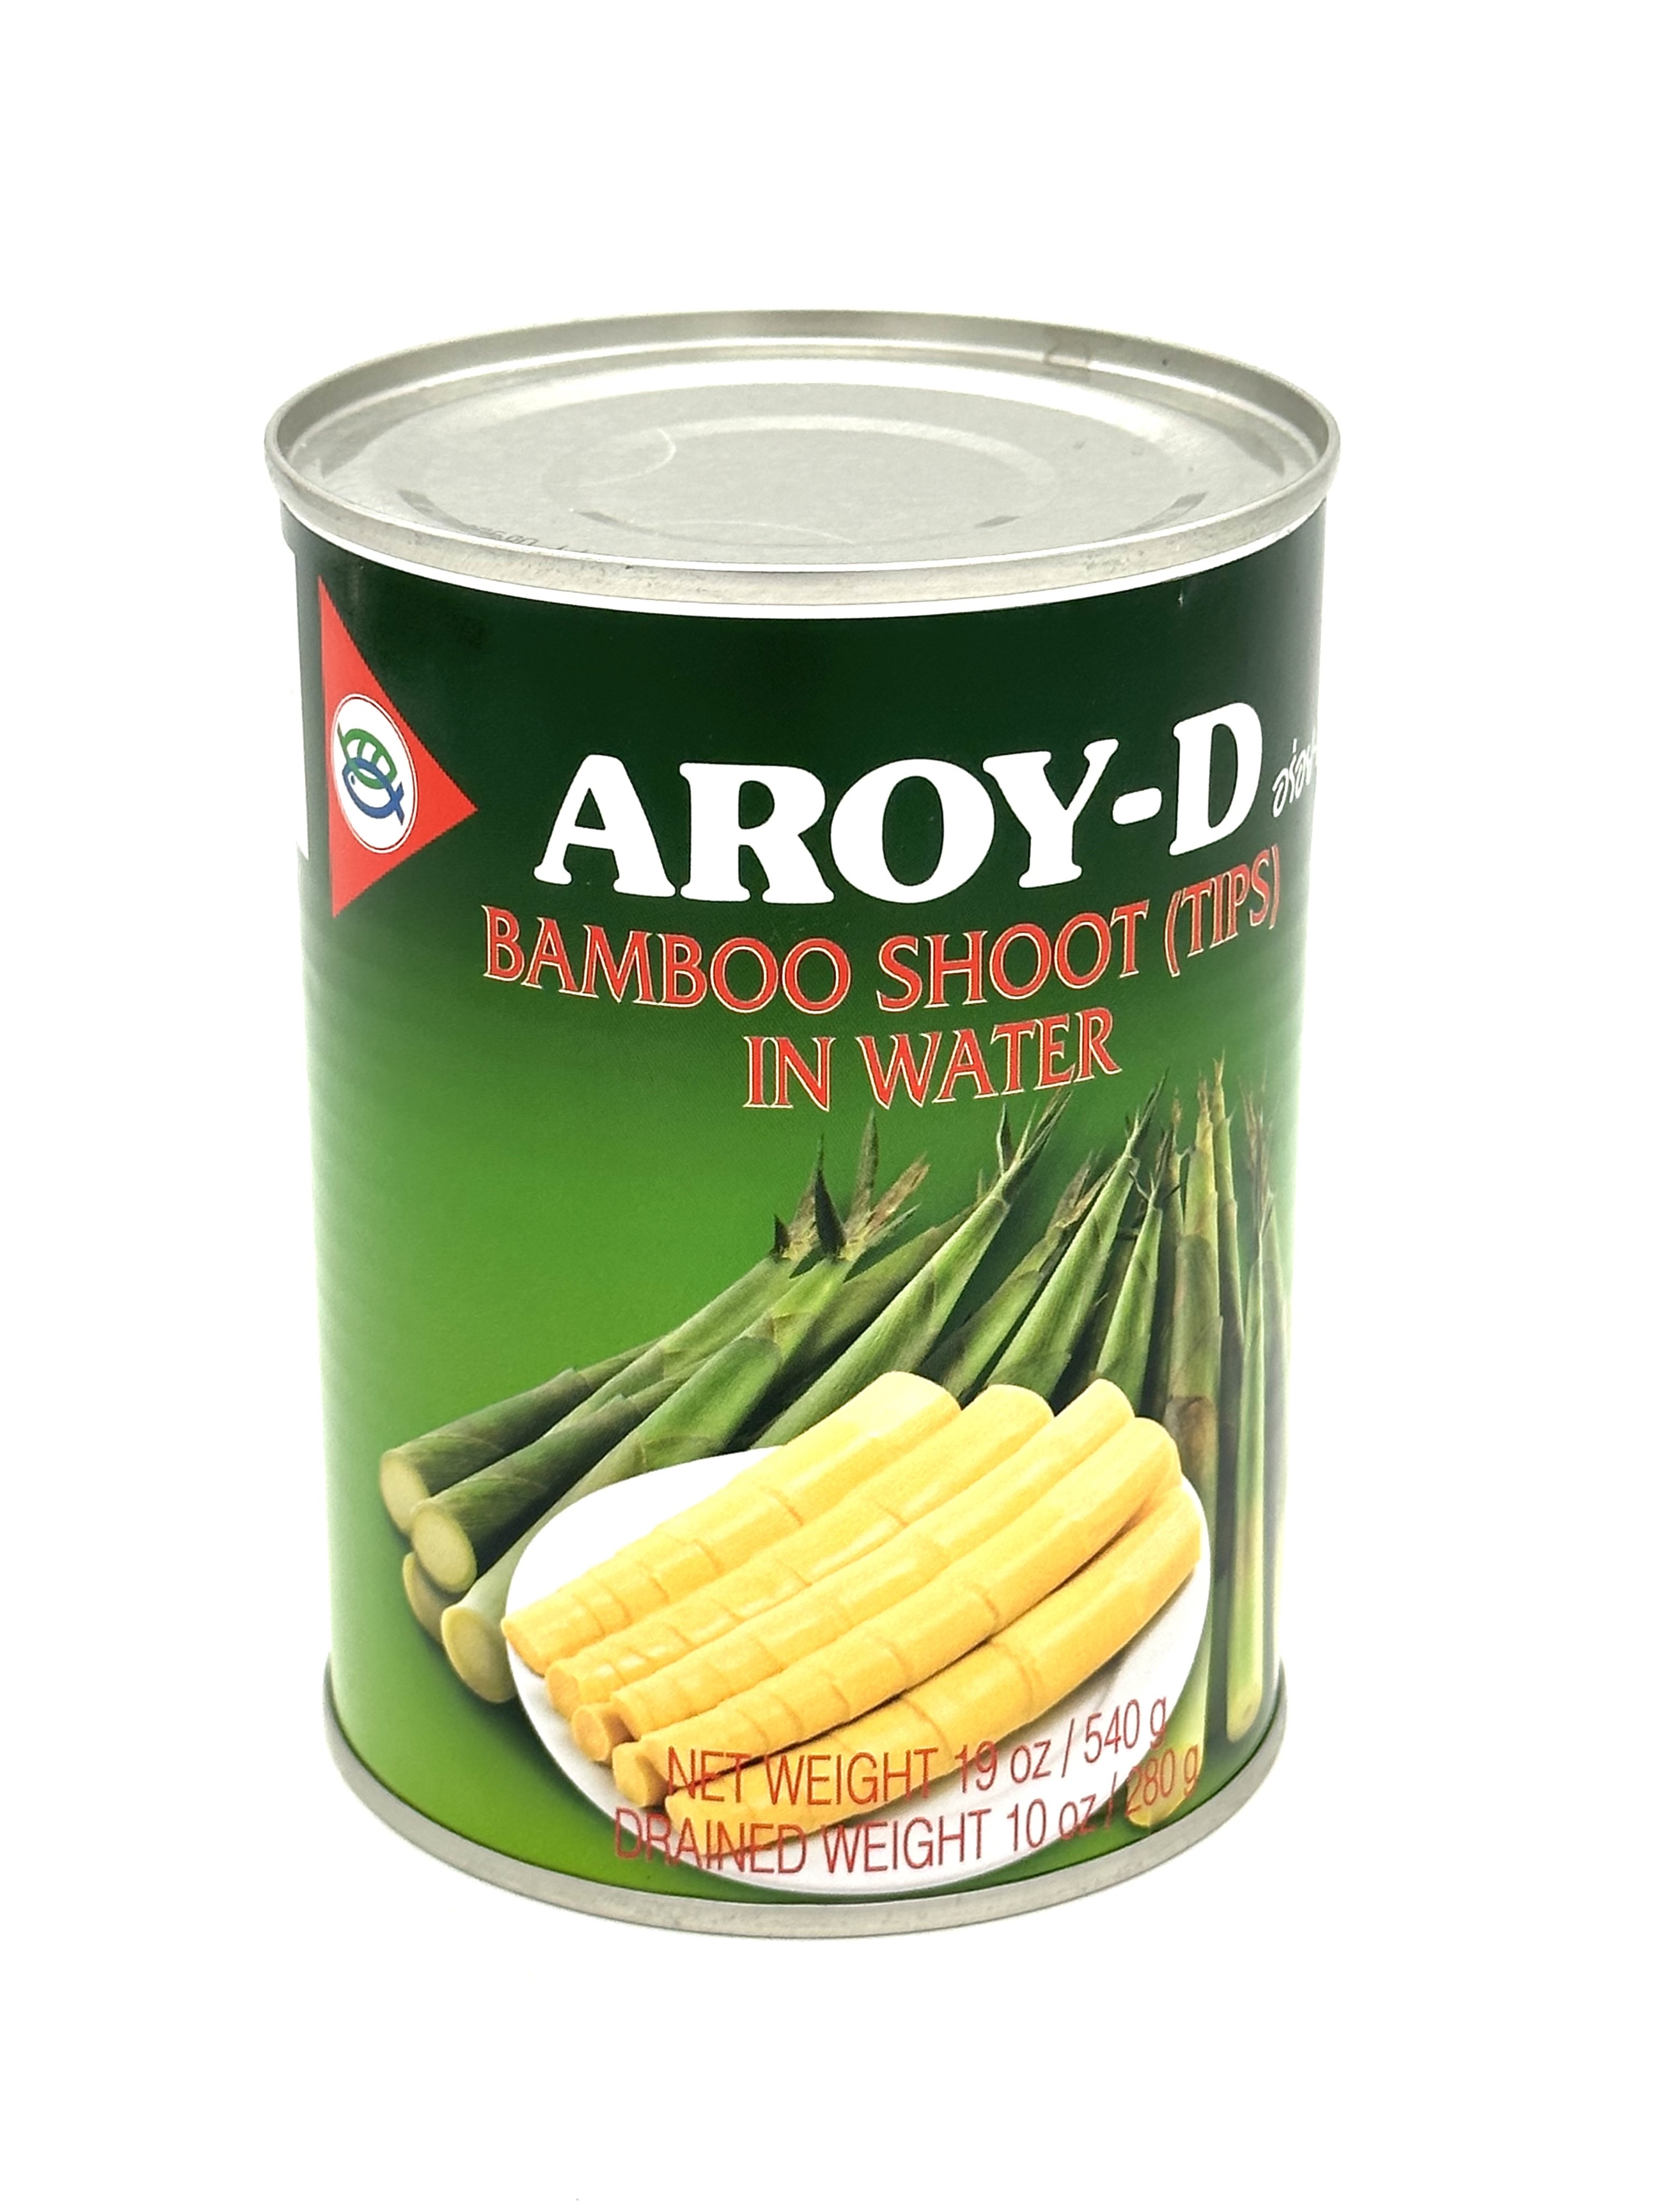 Aroy-D Bamboo Shoot Tips In Water (Strips) 540g ）